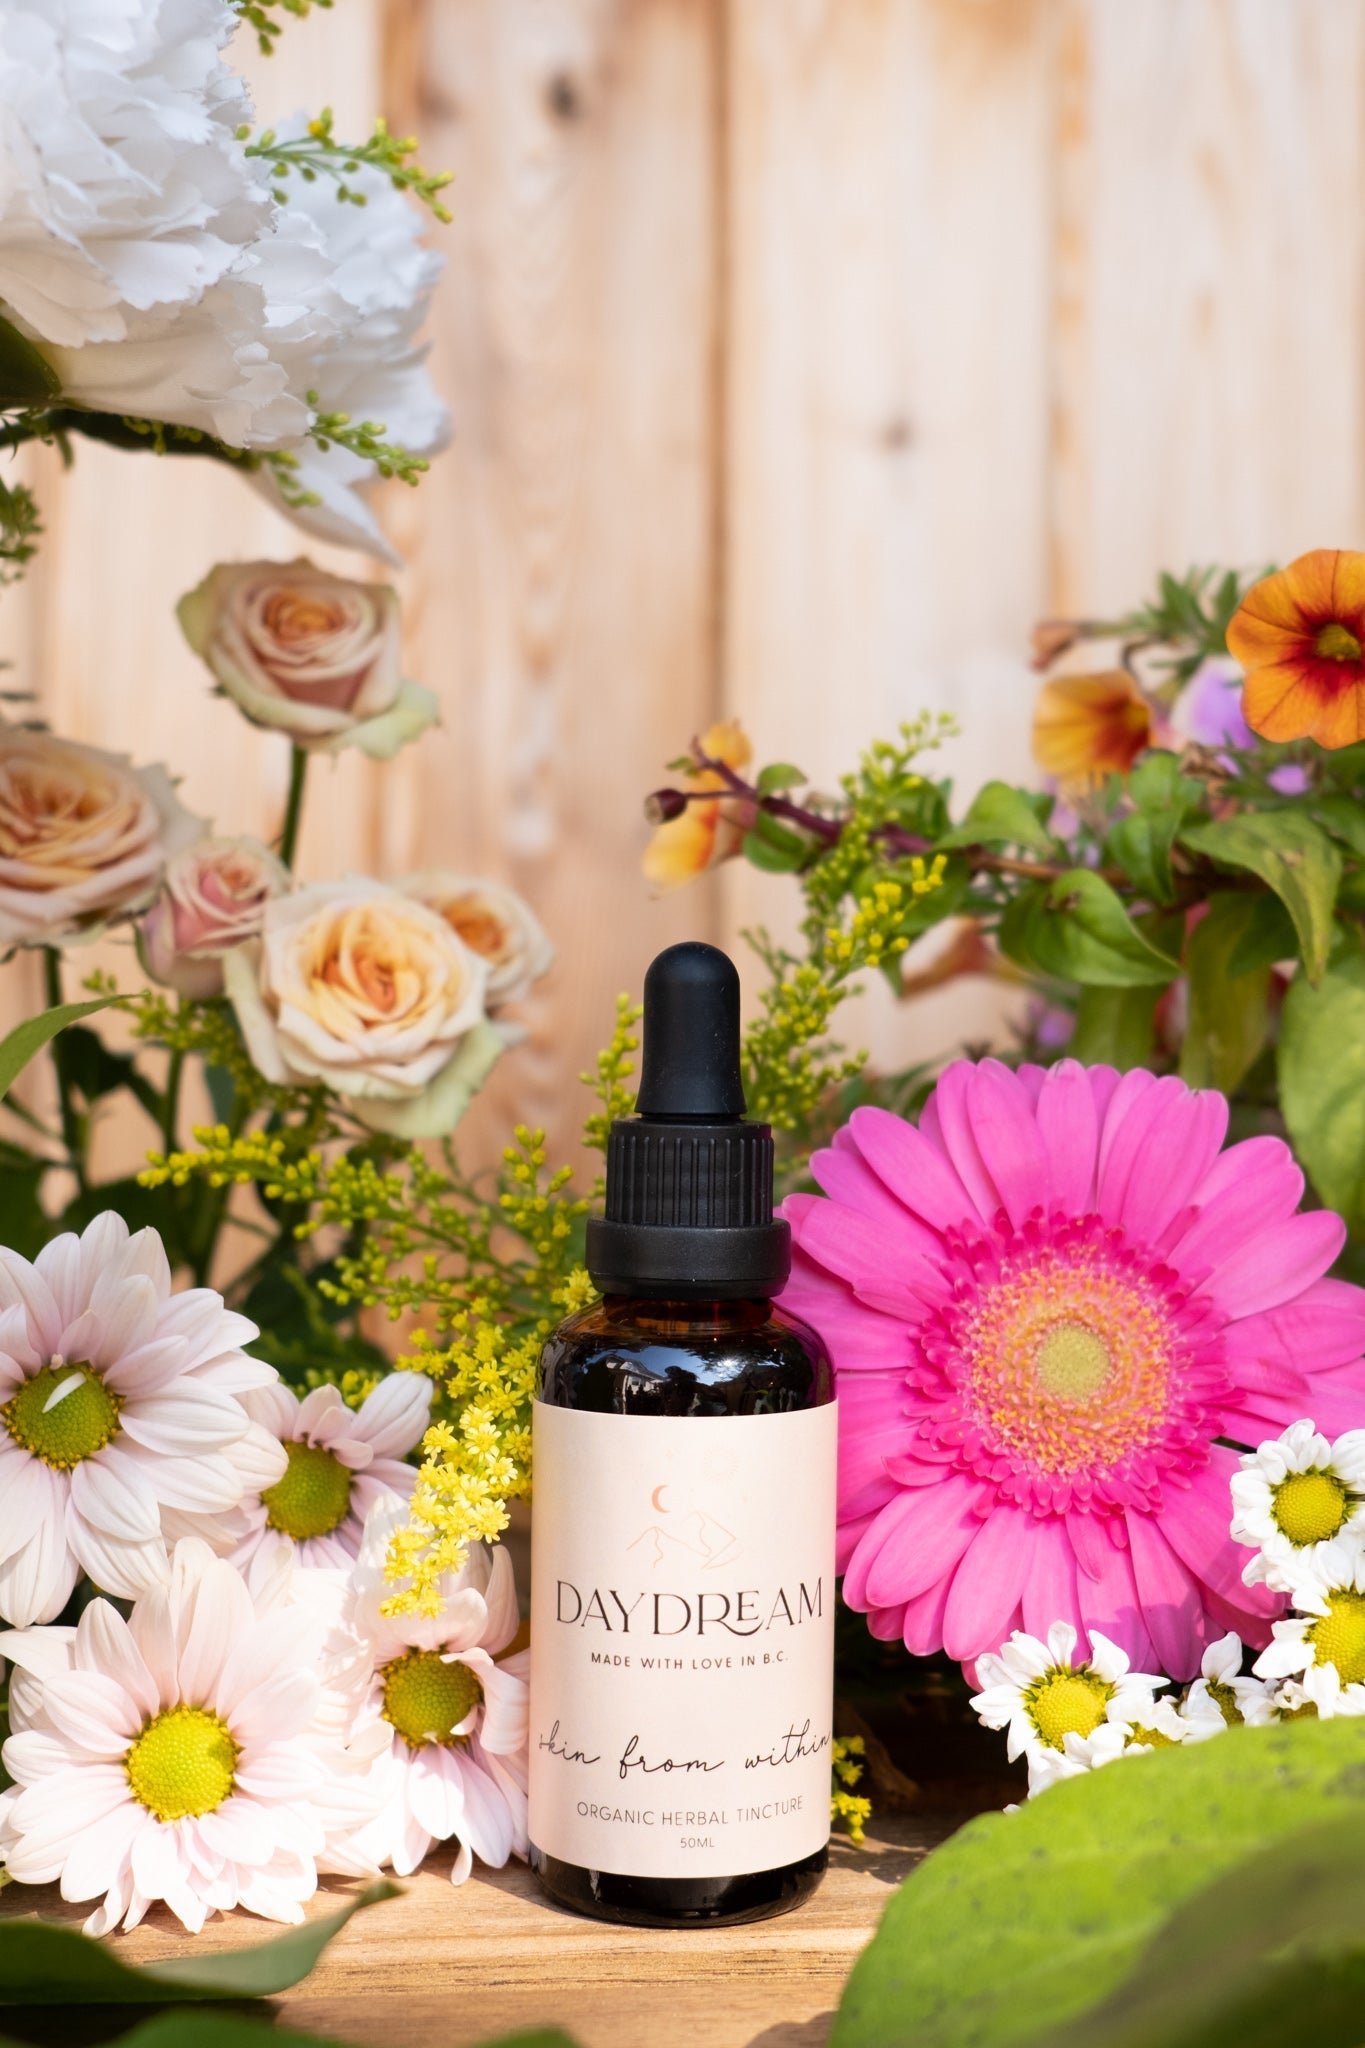 Our Skin from Within herbal tincture has been created to help you naturally achieve glowing, clear skin from the inside out.  This unique formula is meticulously crafted with a blend of herbs that transform your skin from within, delivering unparalleled results that will leave your skin feeling healthy and radiant. 